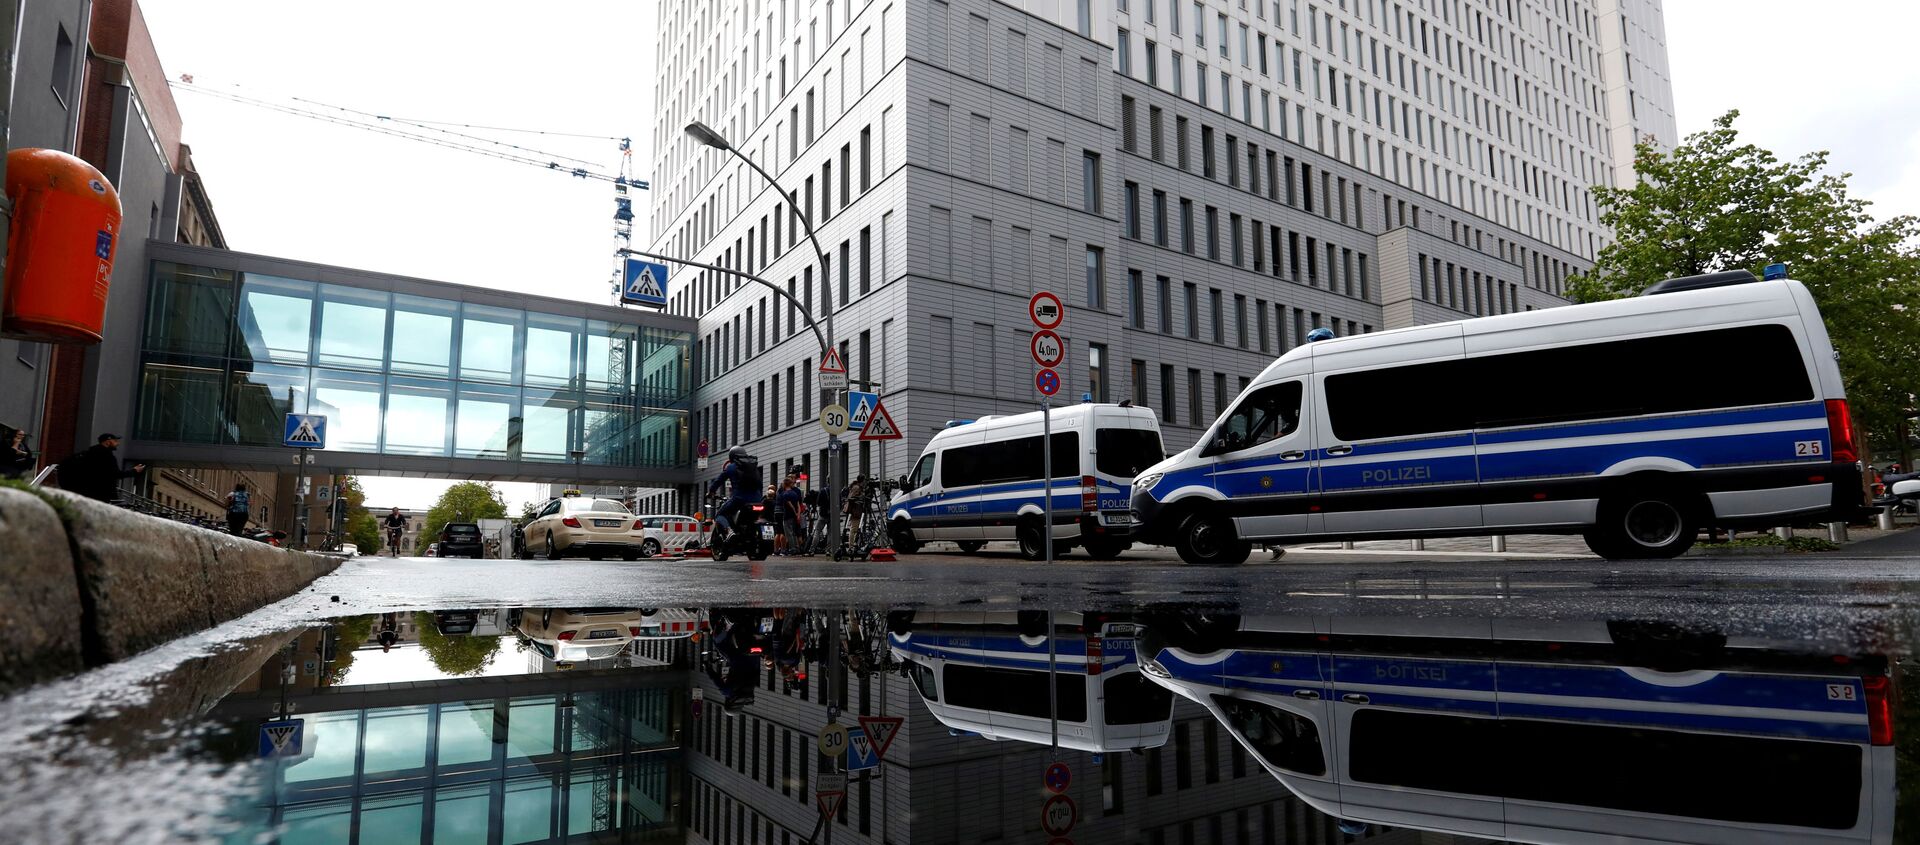 A view shows police vehicles outside the Charite Mitte Hospital Complex, where Russian opposition leader Alexei Navalny is receiving medical treatment, in Berlin, Germany August 24, 2020 - Sputnik International, 1920, 15.09.2020